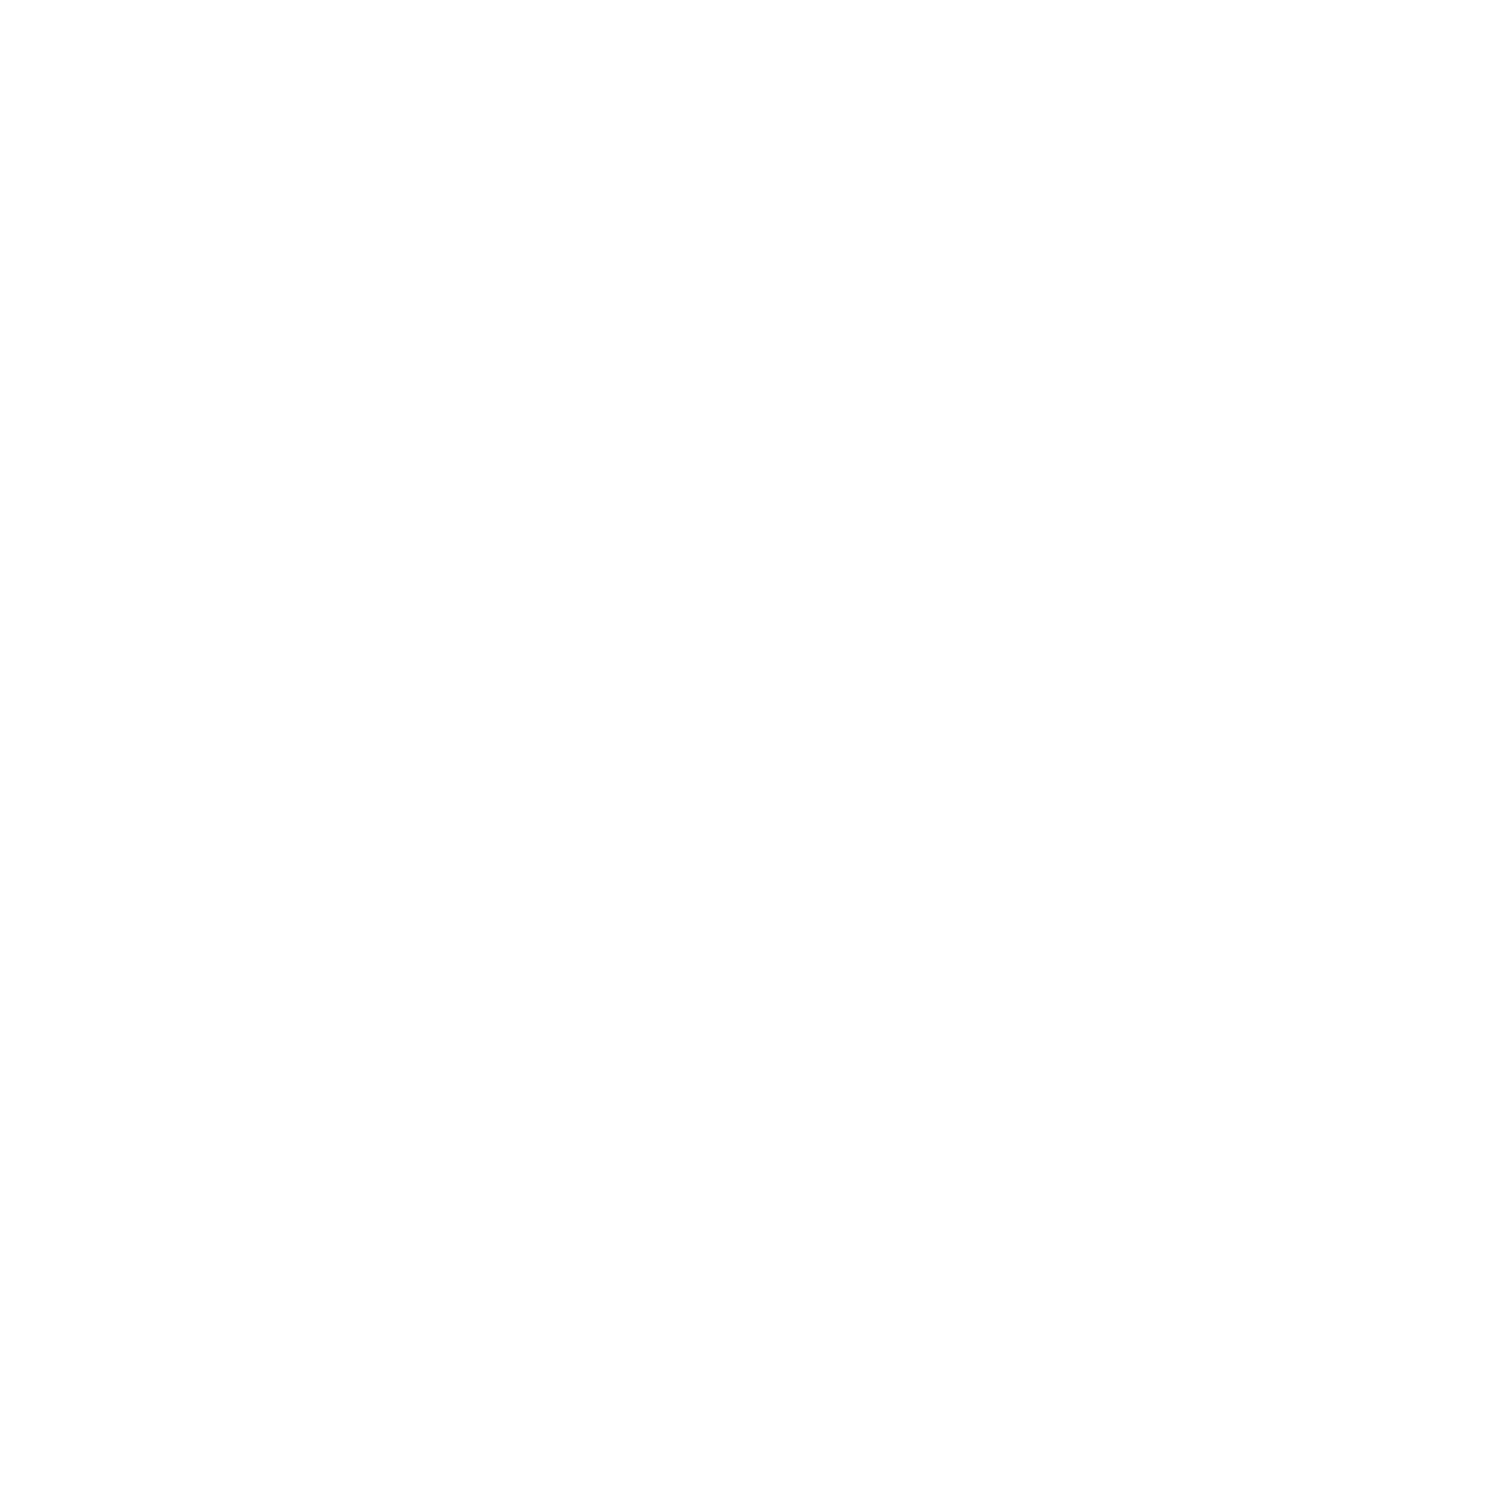 Prevail Boxing